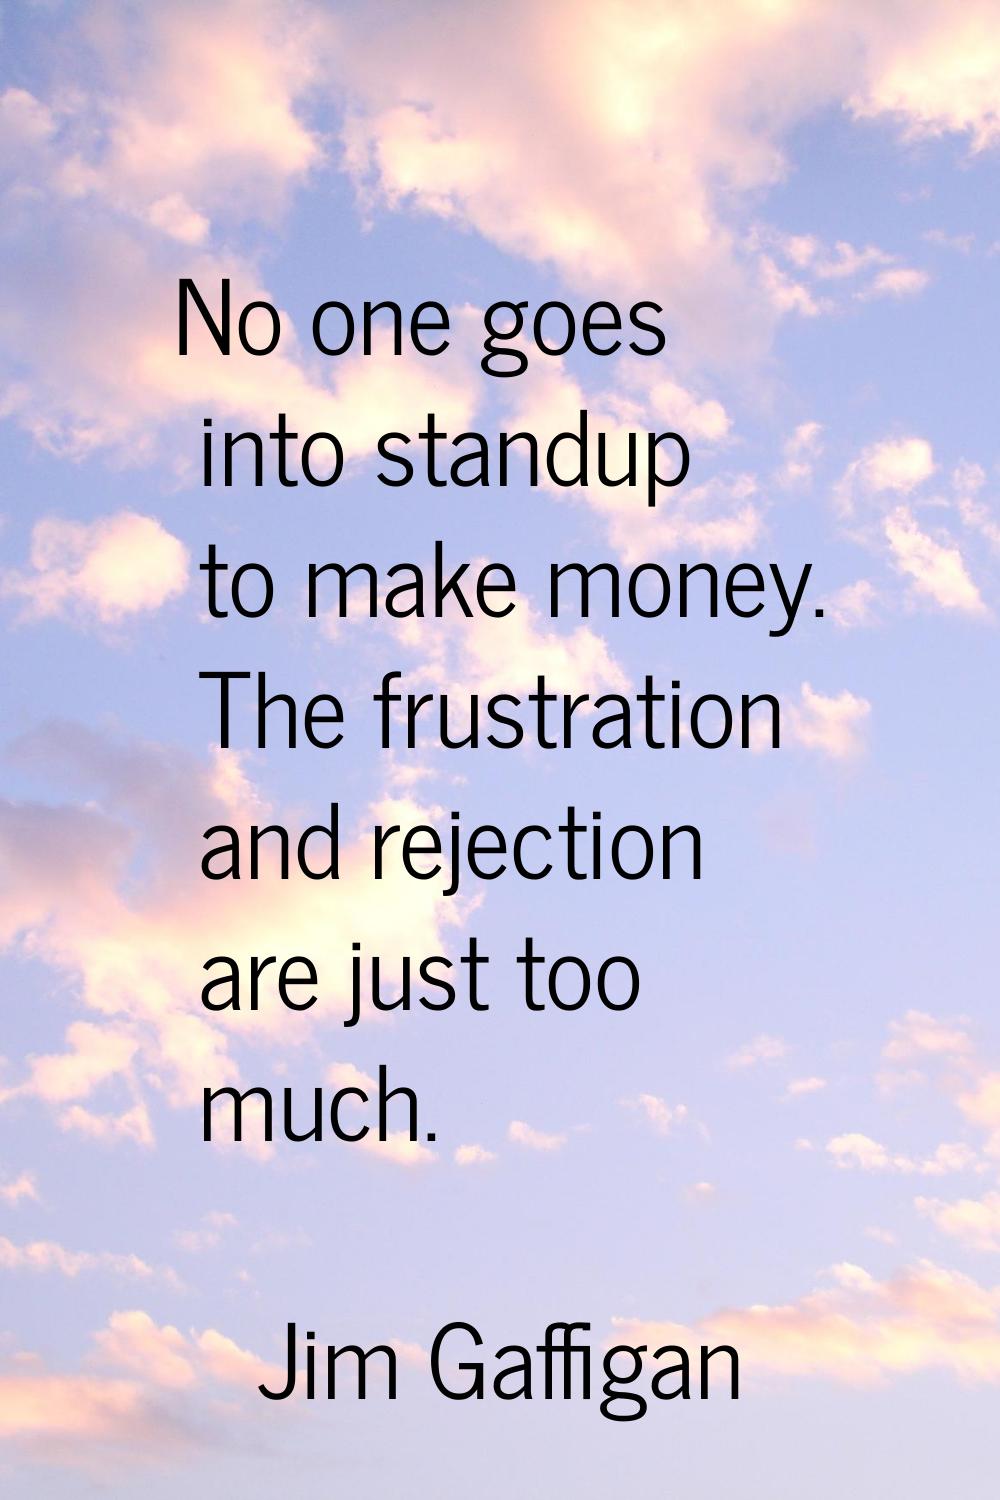 No one goes into standup to make money. The frustration and rejection are just too much.